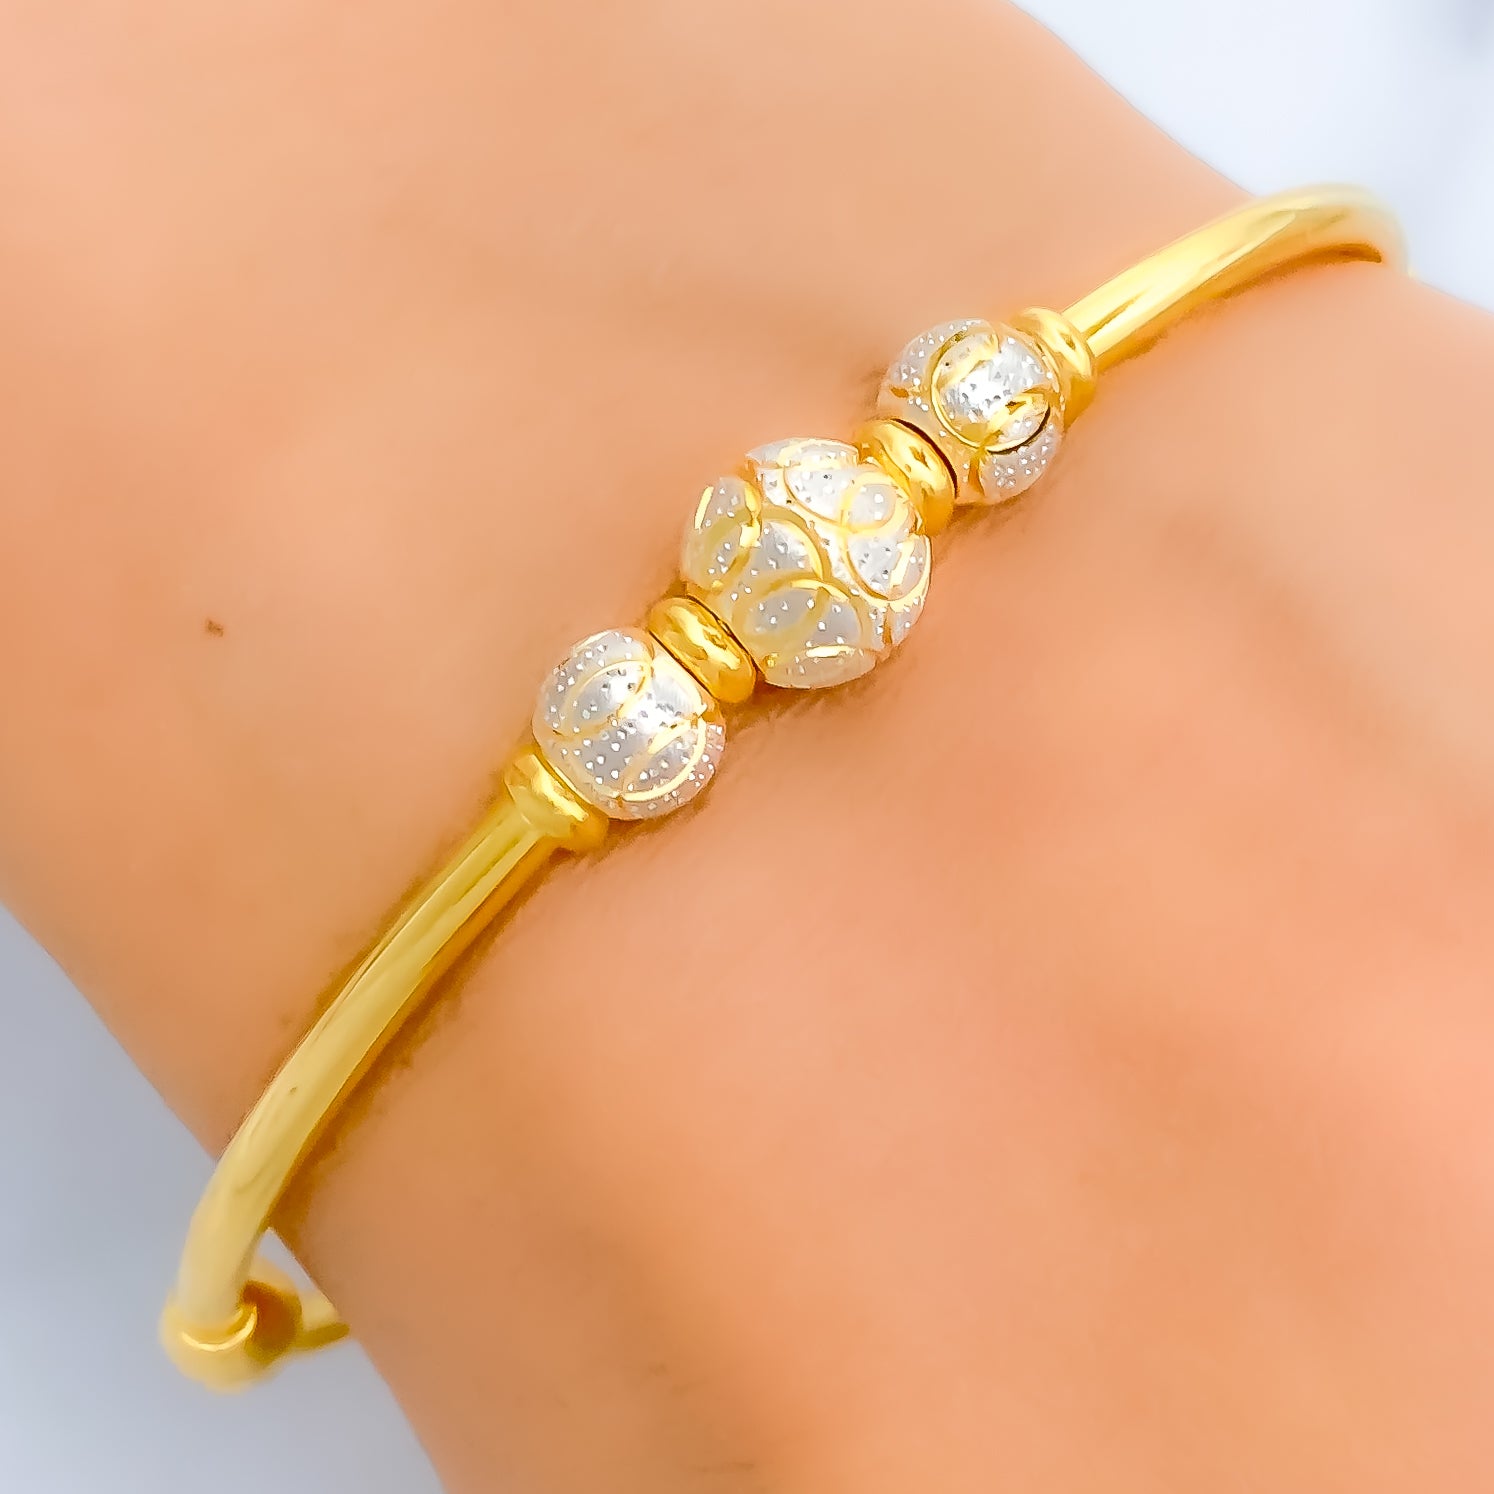 Gold baby bangle lightweight | Gold earrings for kids, Baby jewelry gold,  Kids gold jewelry